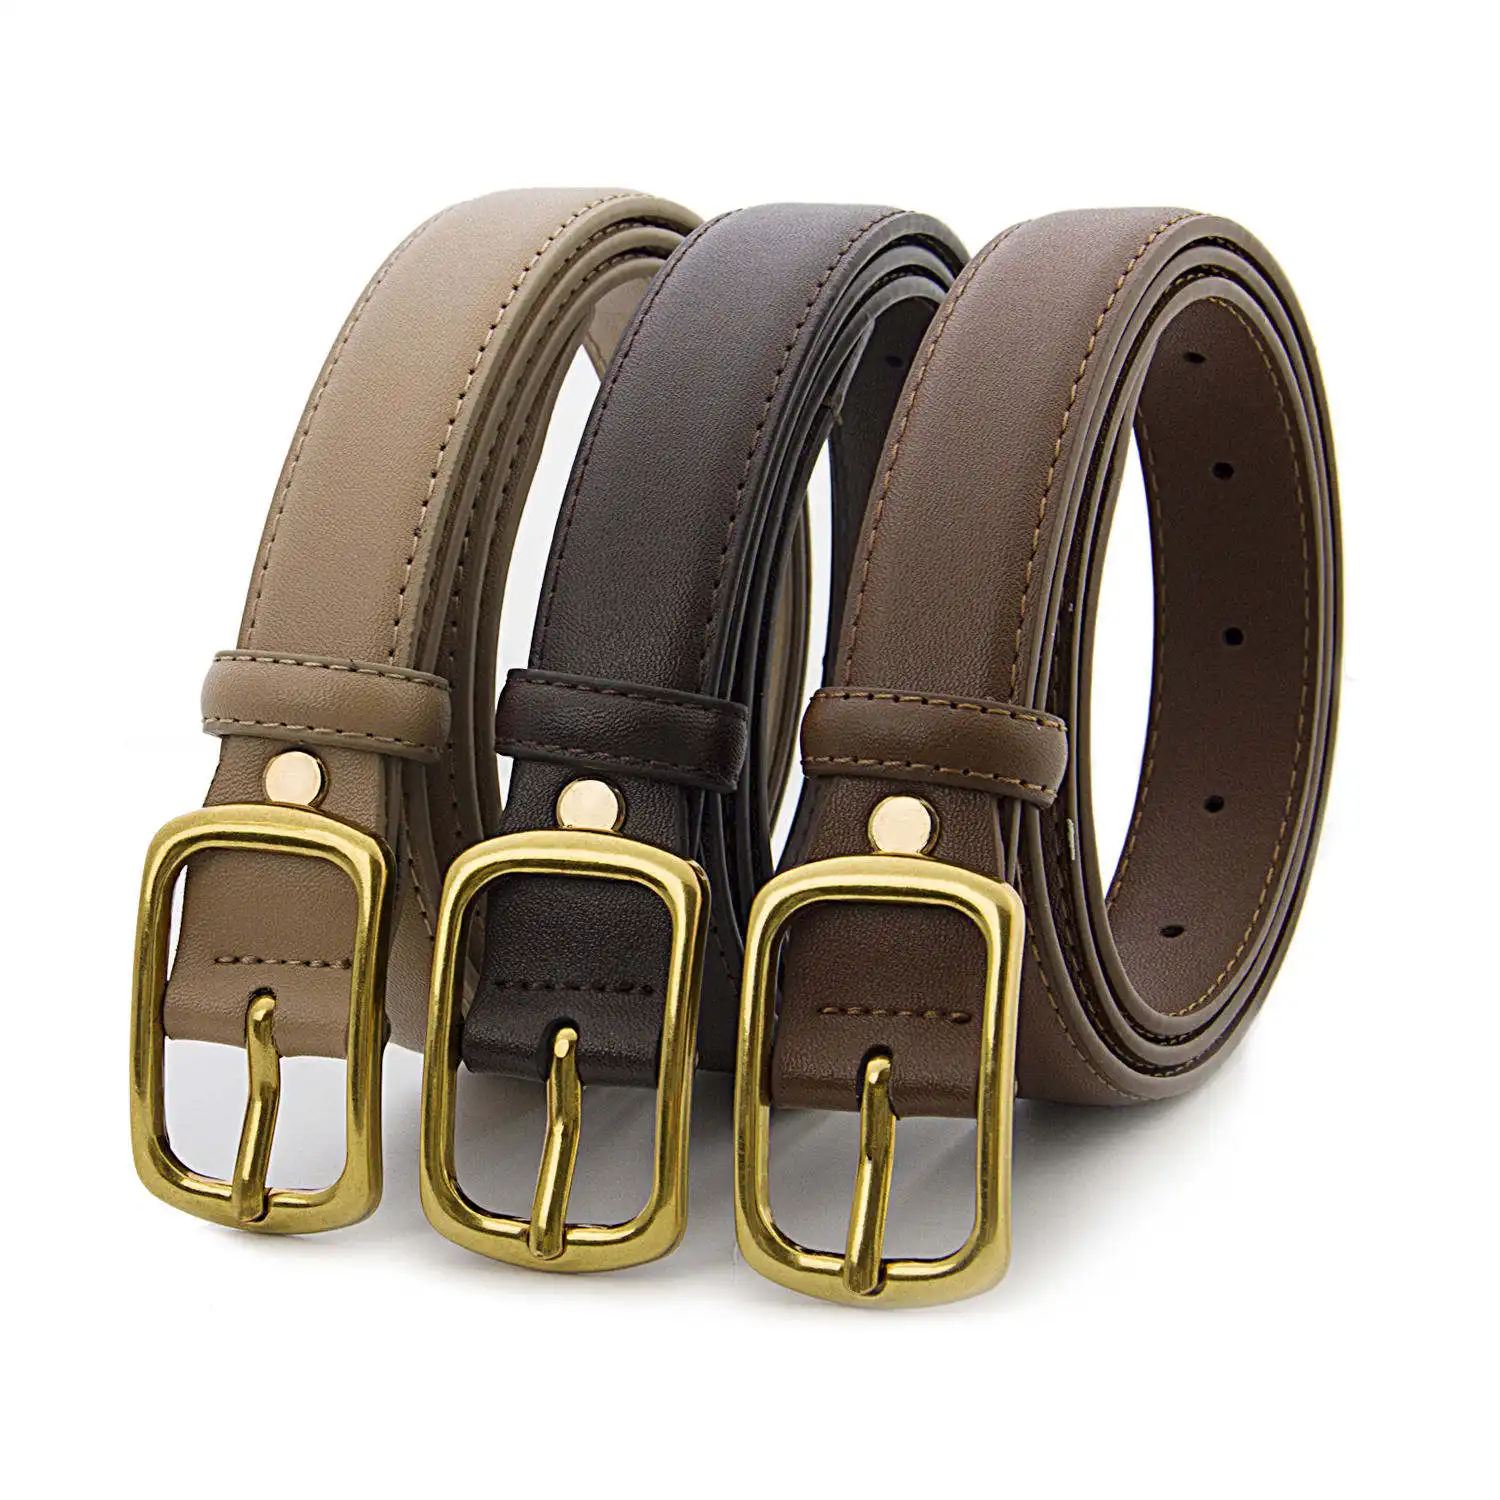 Women's Genuine Leather Belt Factory Produces Popular Leather Belts Versatile And Suitable For Women's Belts In Hong Kong Style